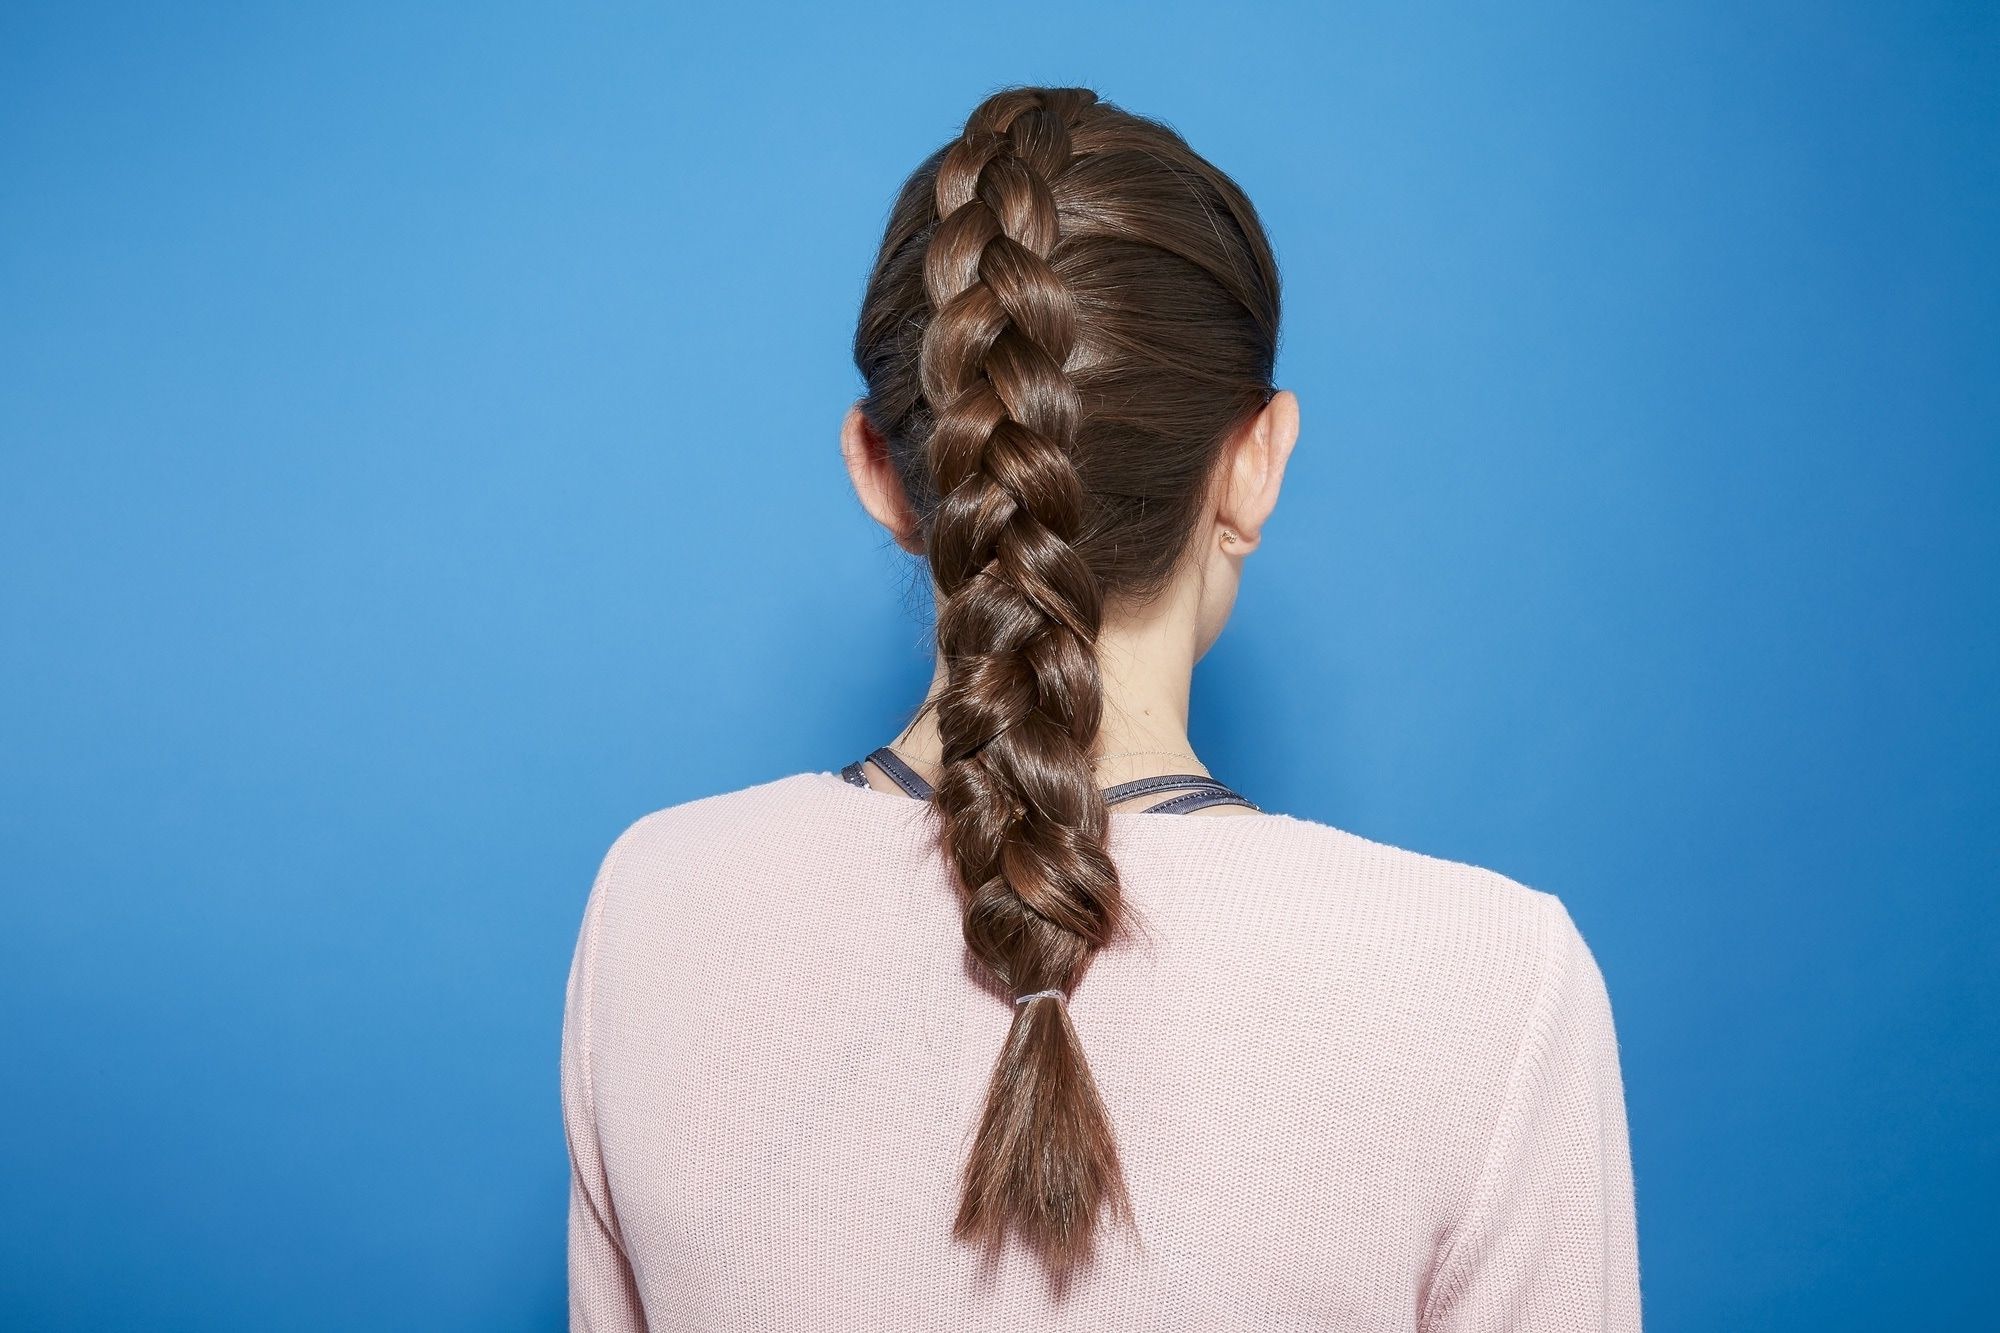 How To Do A Reverse French Braid In 6 Easy Steps (with Video & Pics!) Throughout Famous Reverse French Braid Ponytail Hairstyles (View 15 of 20)